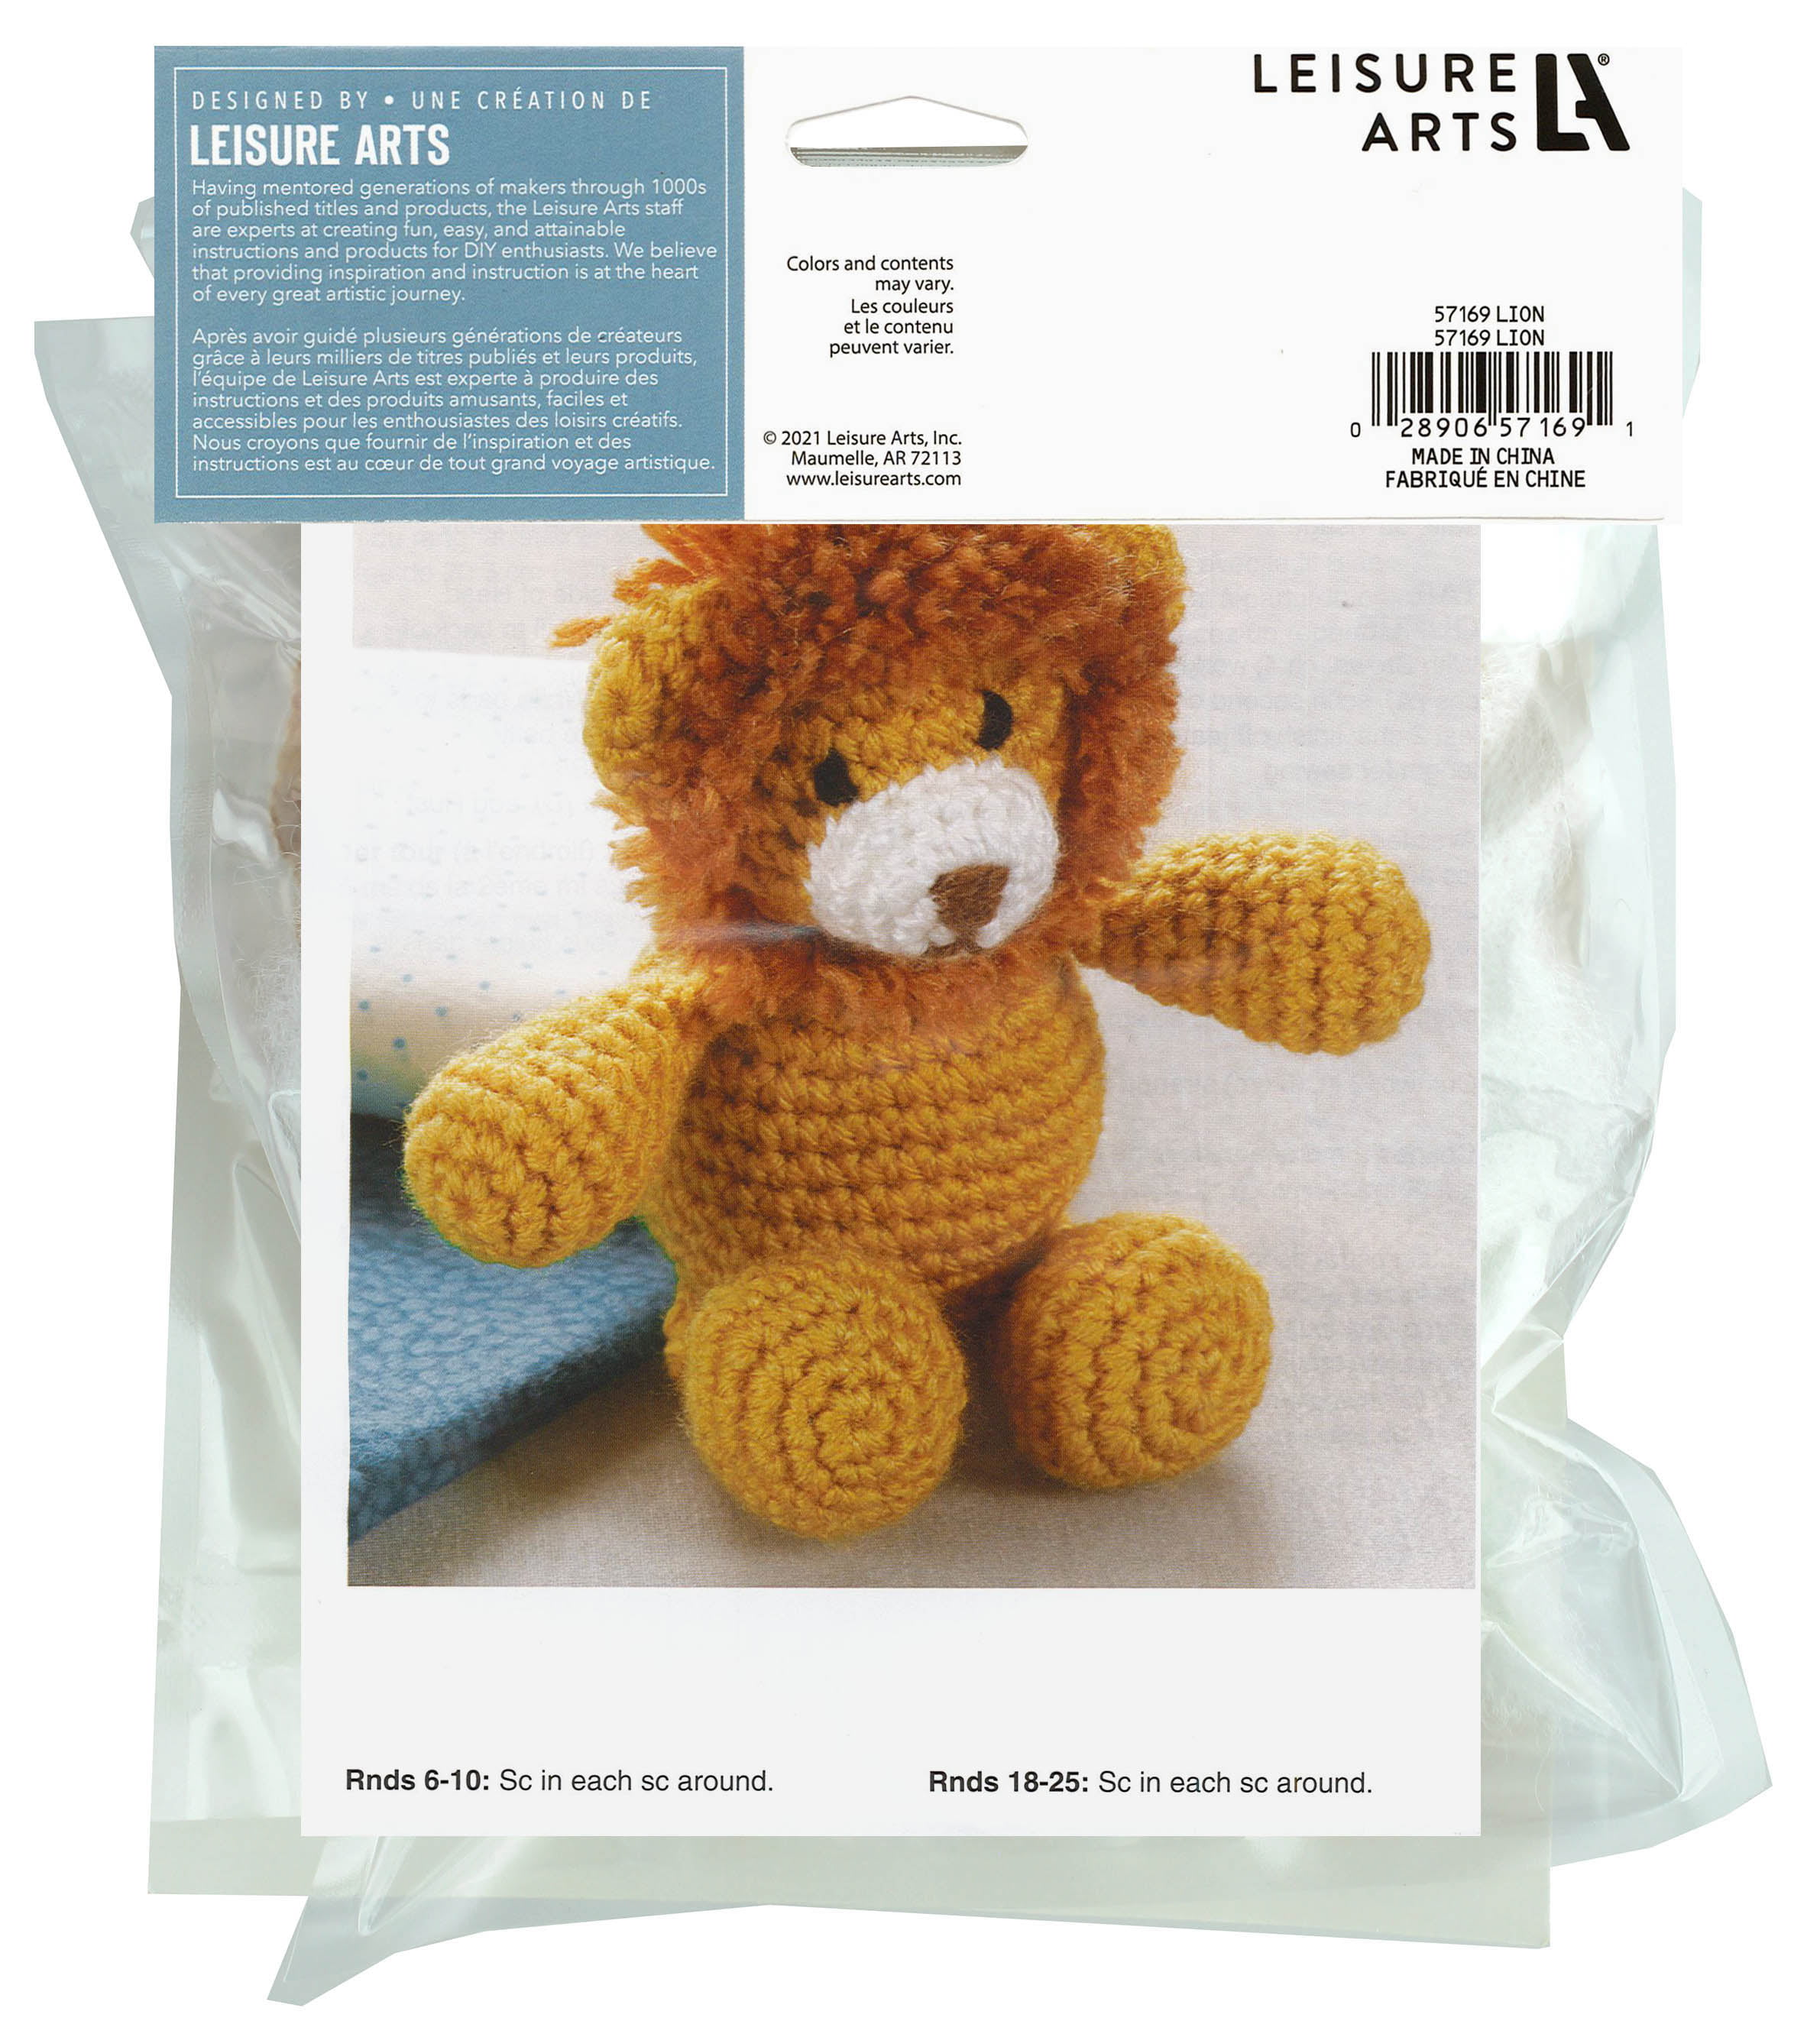 Leisure Arts Little Crochet Friend Animals Crochet Kit, Lion, 8, Complete  Crochet kit, Learn to Crochet Animal Starter kit for All Ages, Includes  Instructions, DIY amigurumi Crochet Kits 